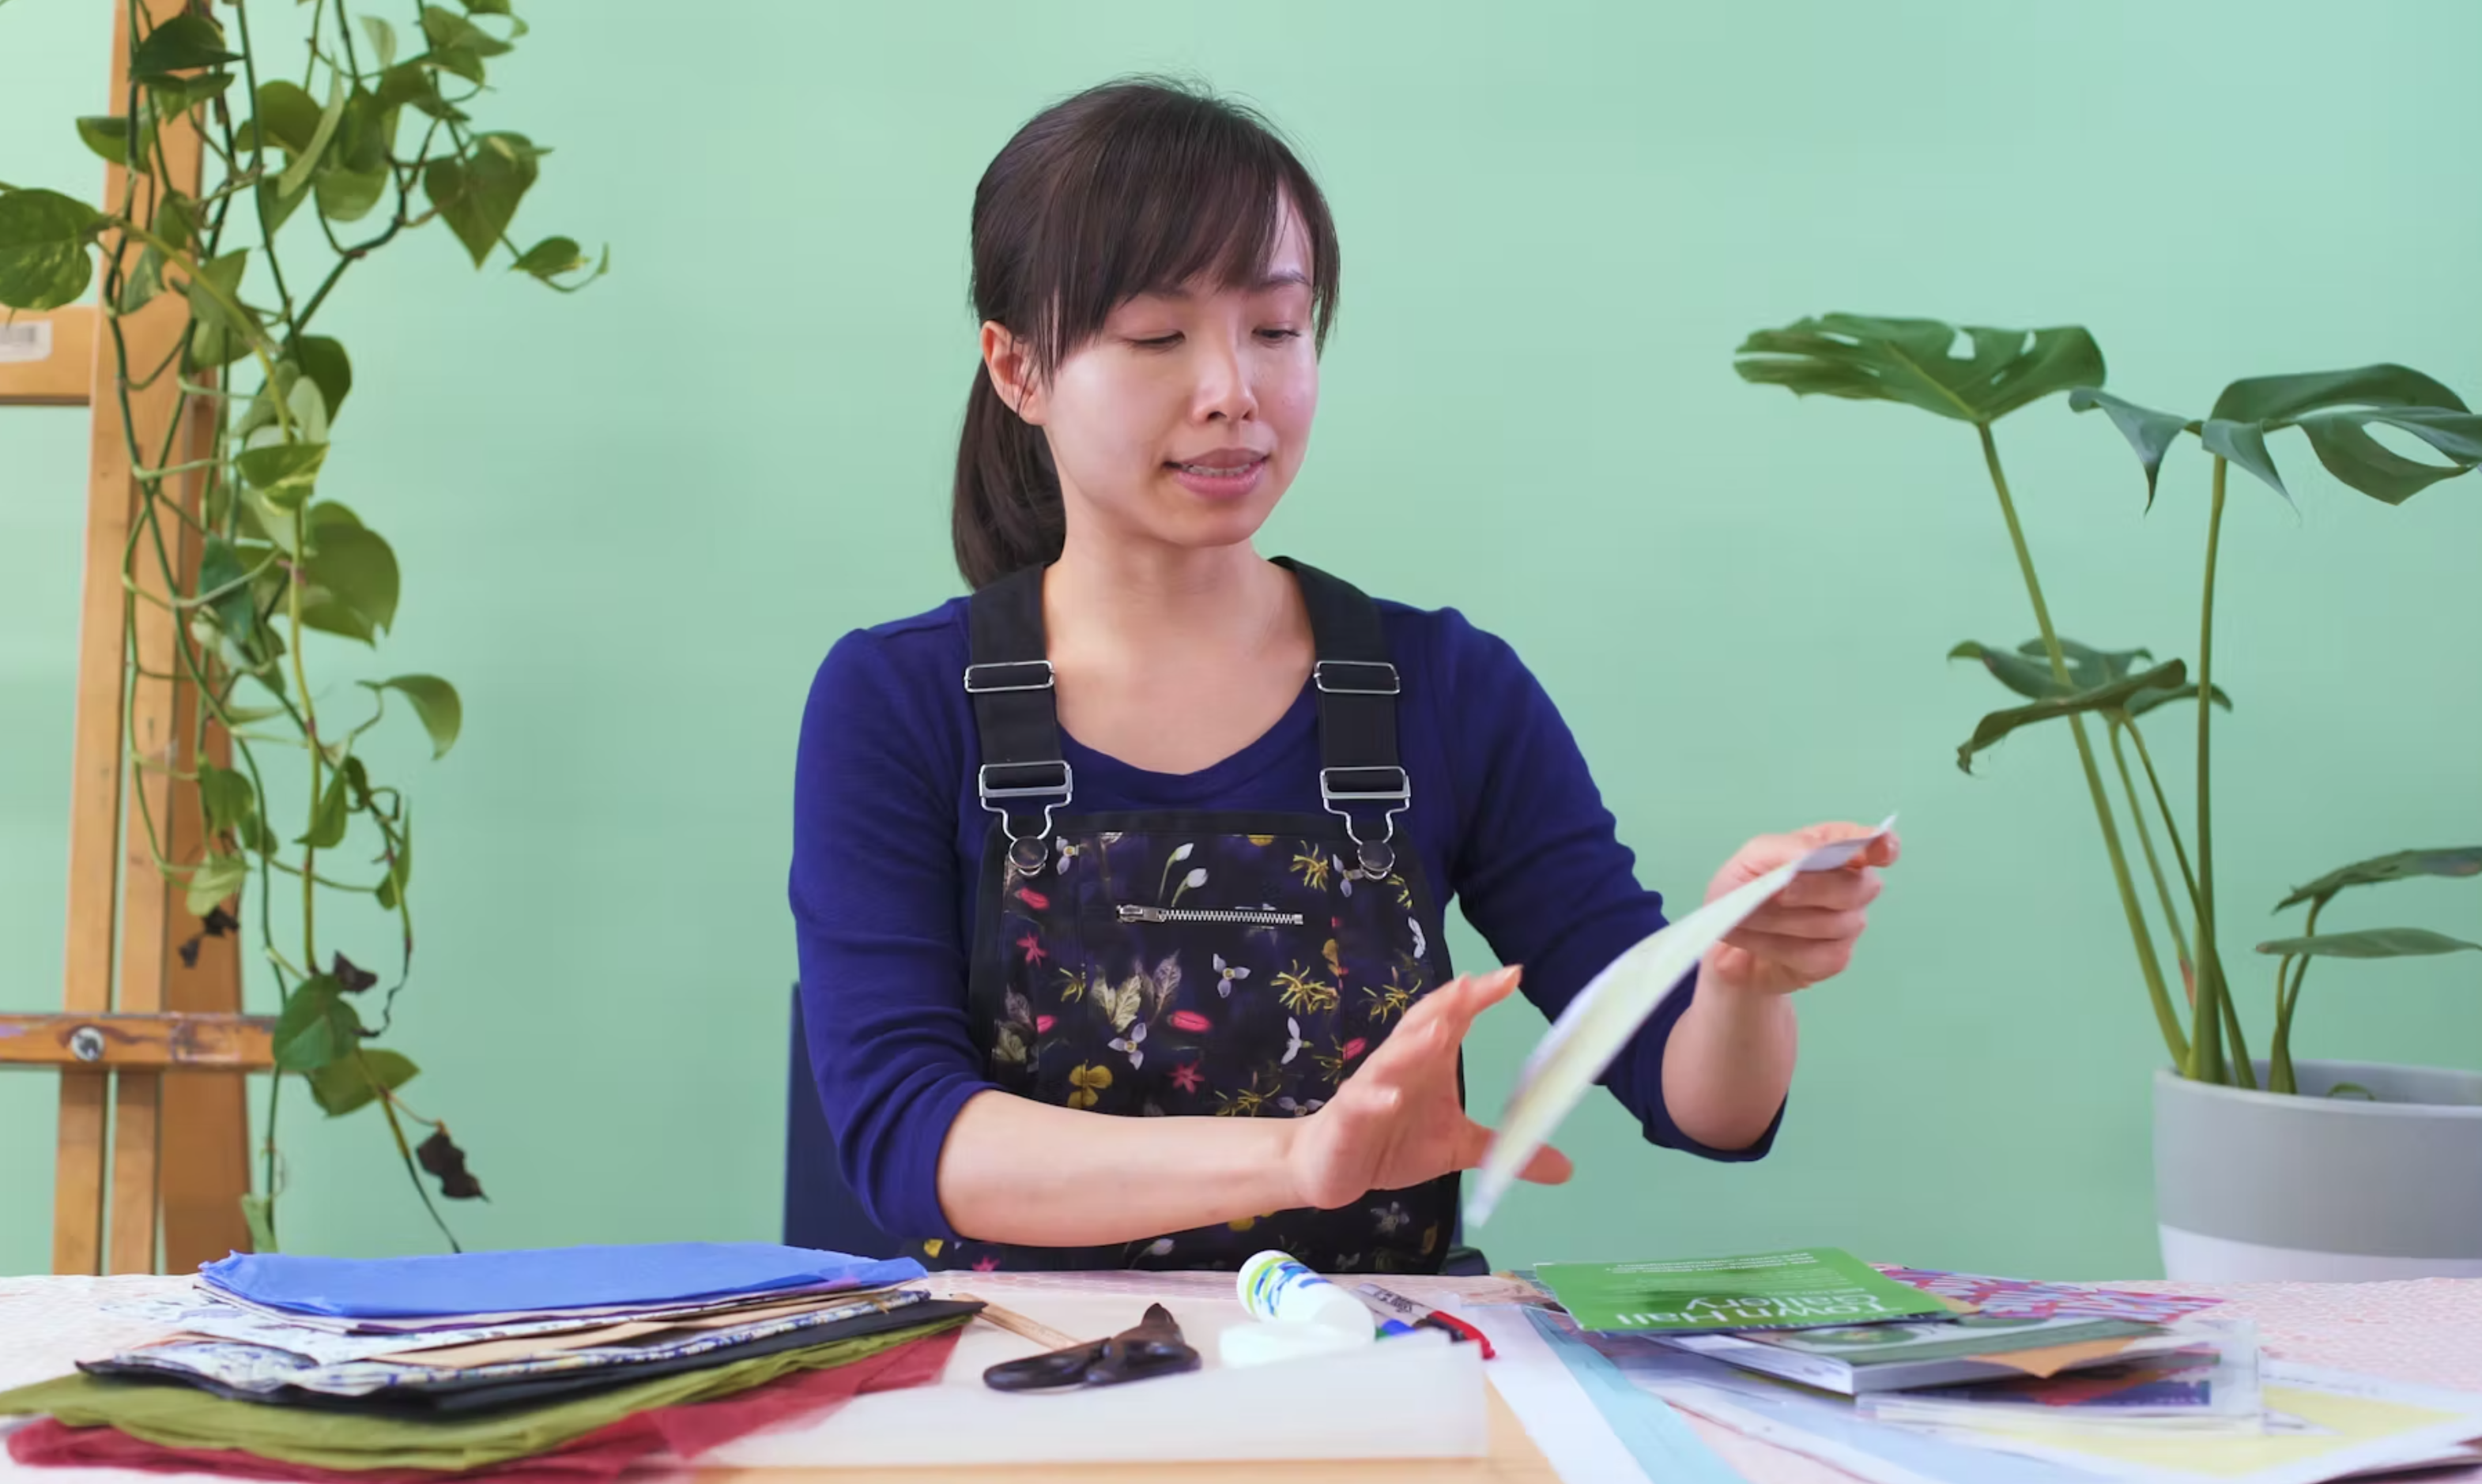 An East Asian female-presenting artist wearing overalls cuts paper in a room with teal walls and vibrant indoor plants.